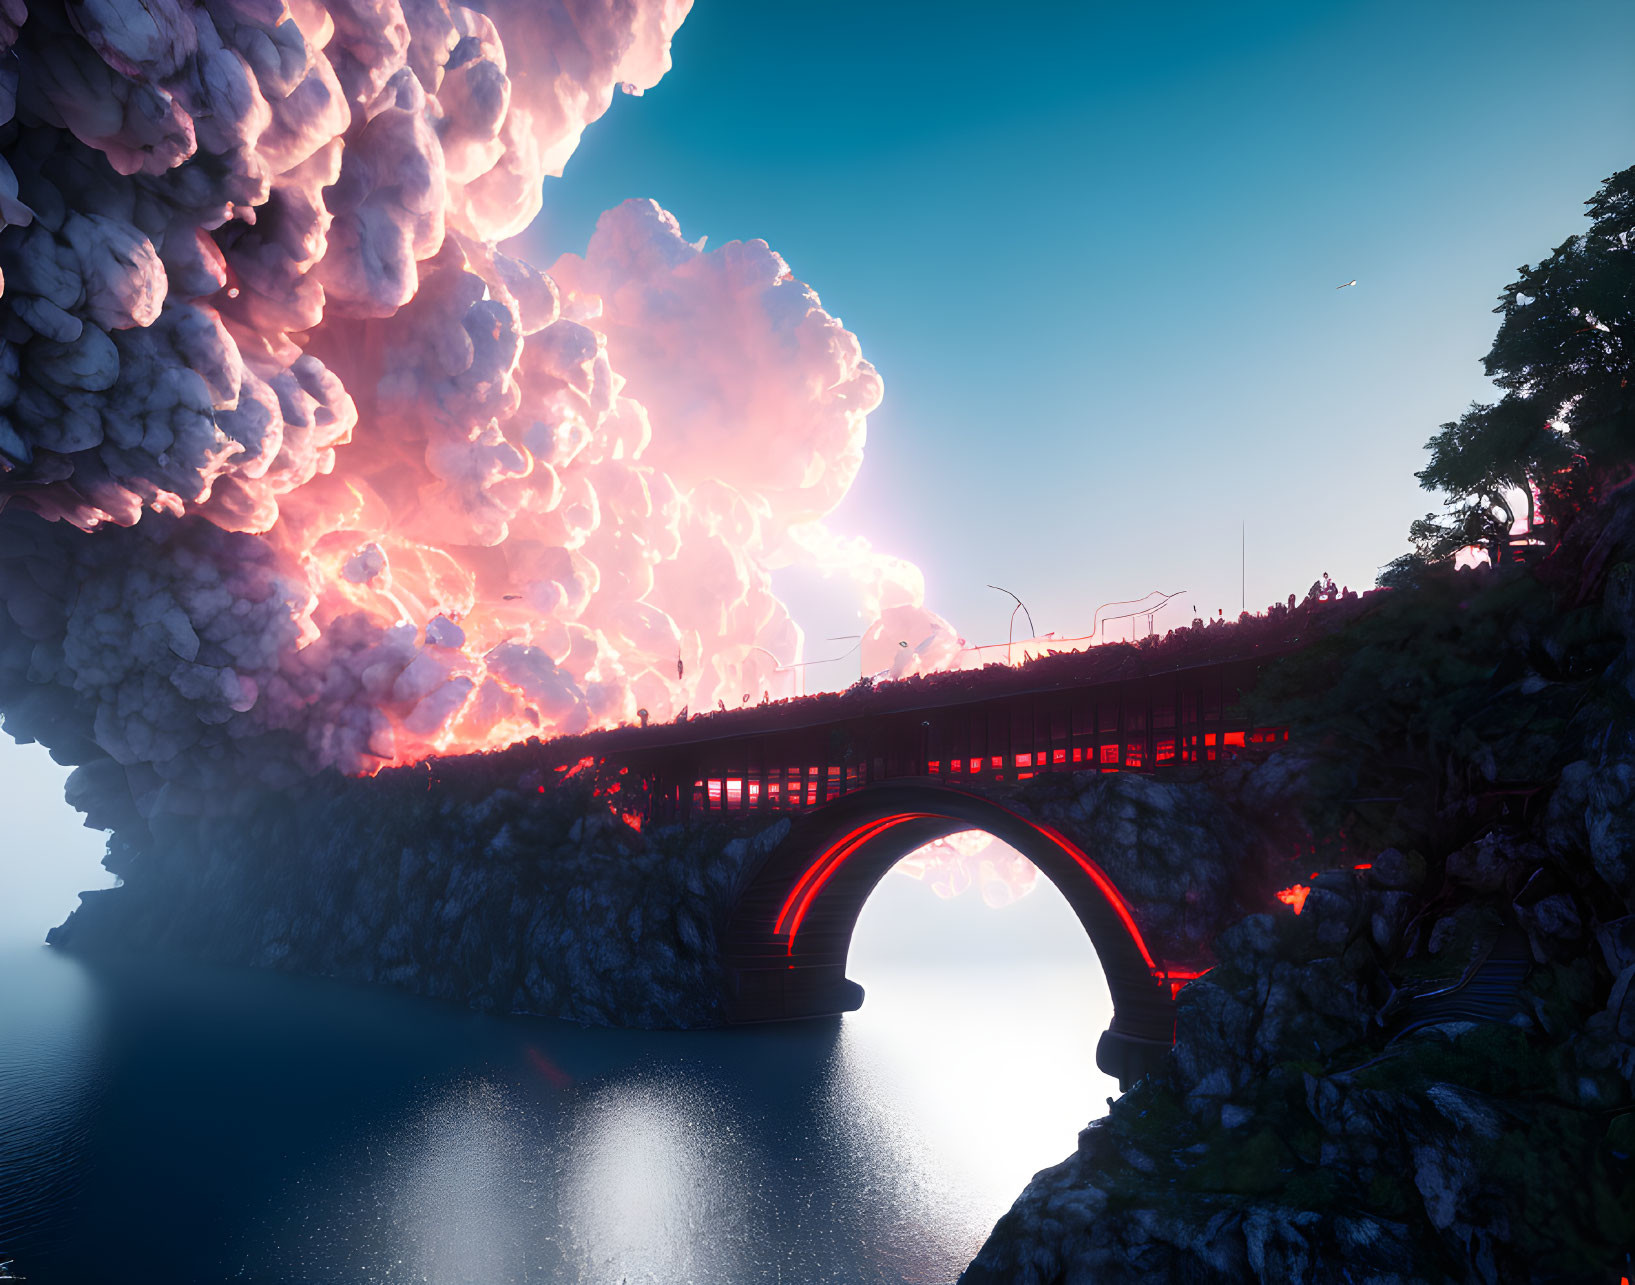 Illuminated bridge over calm water at dusk with fiery cloud explosion